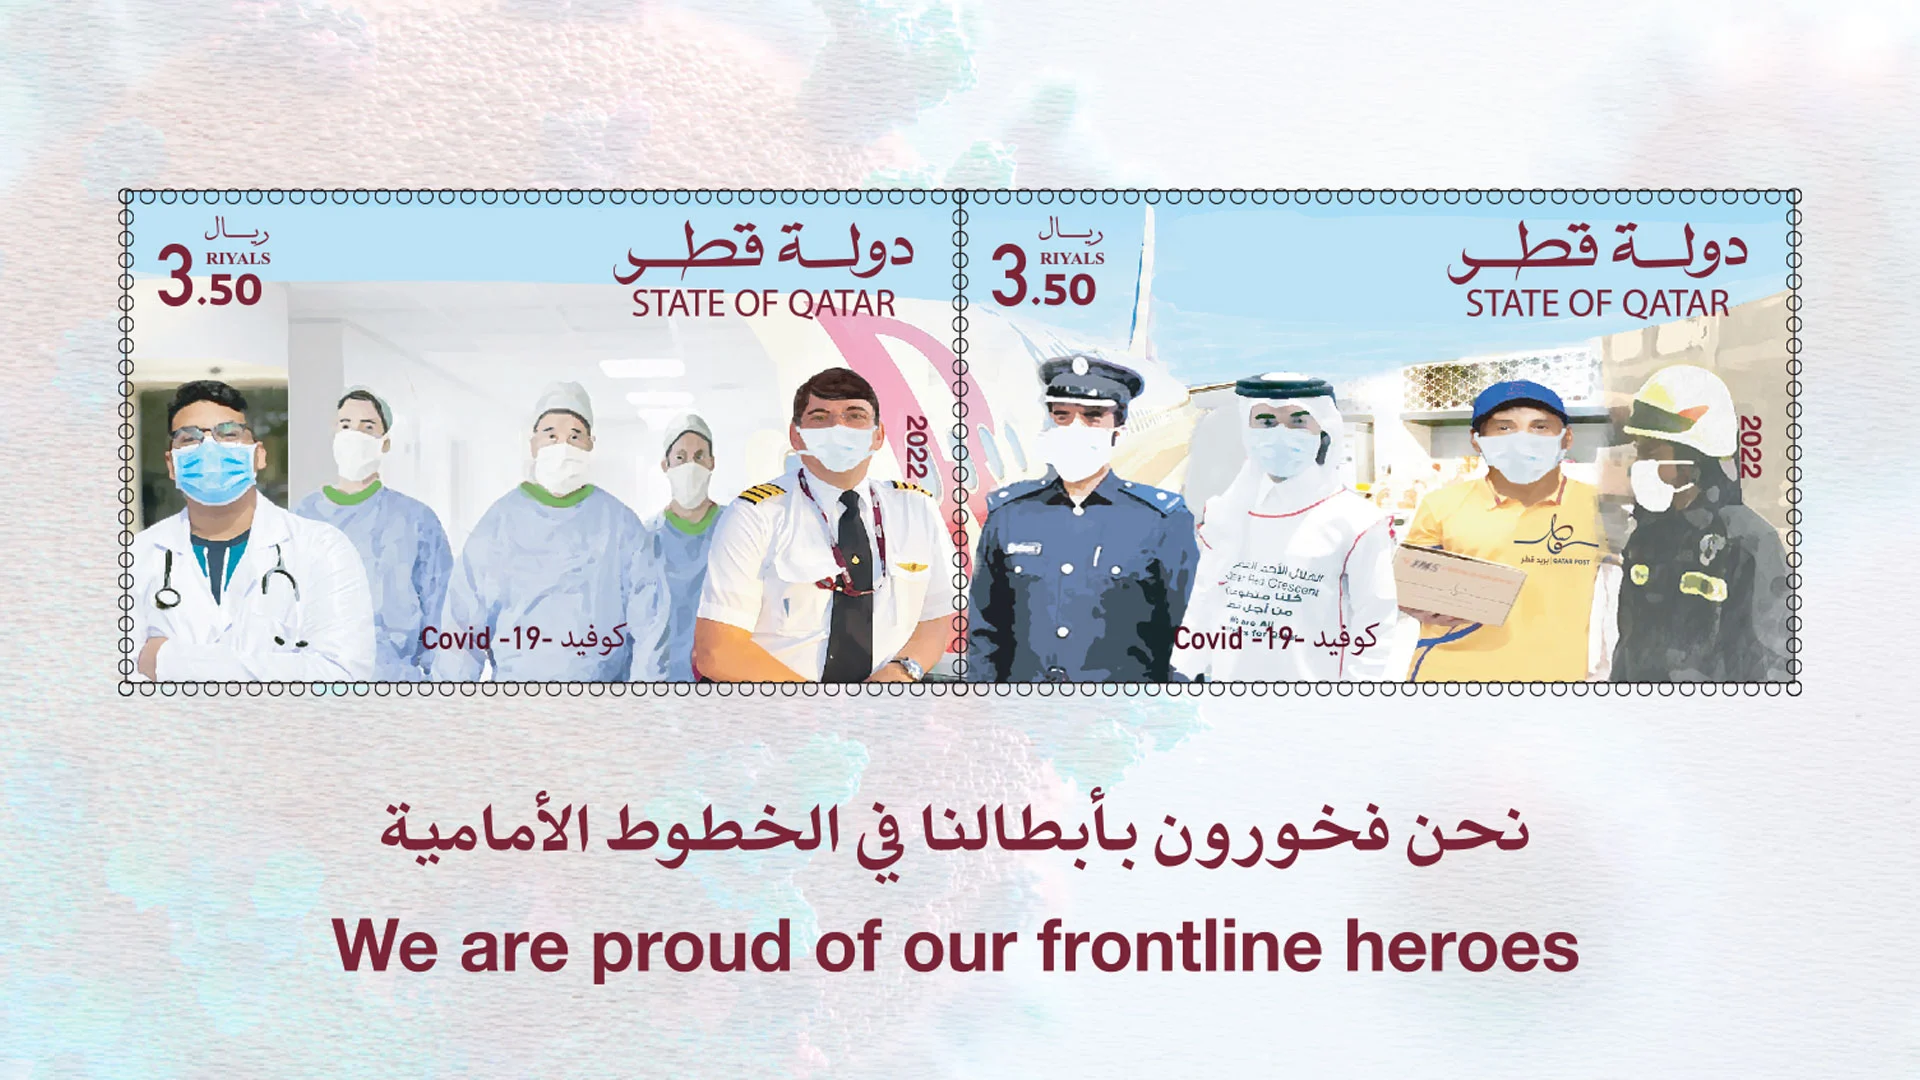 Qatar Post launches COVID-19 stamps to honor frontline workers